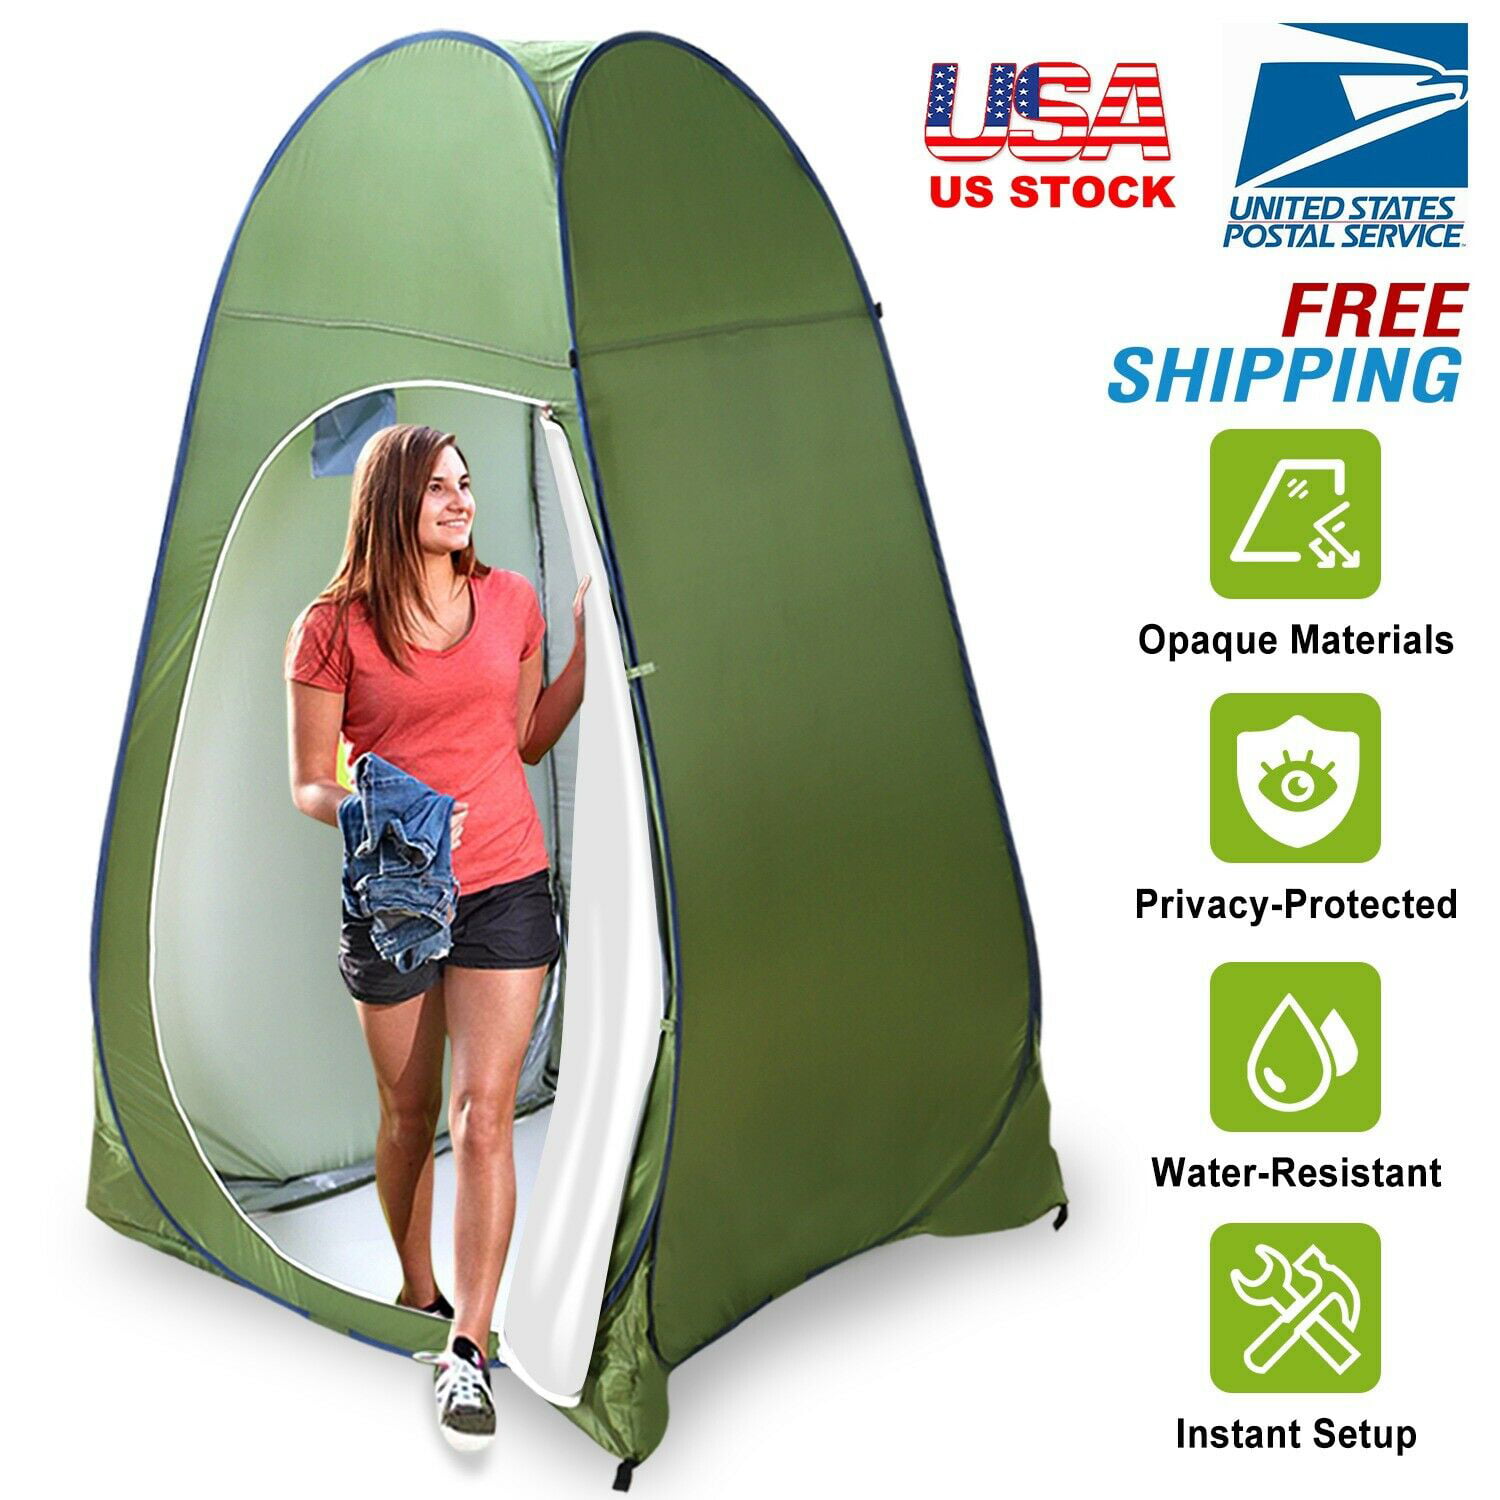 Instant Portable Shower Pop Up Tent Camping Outdoor Privacy Toilet Changing Room 